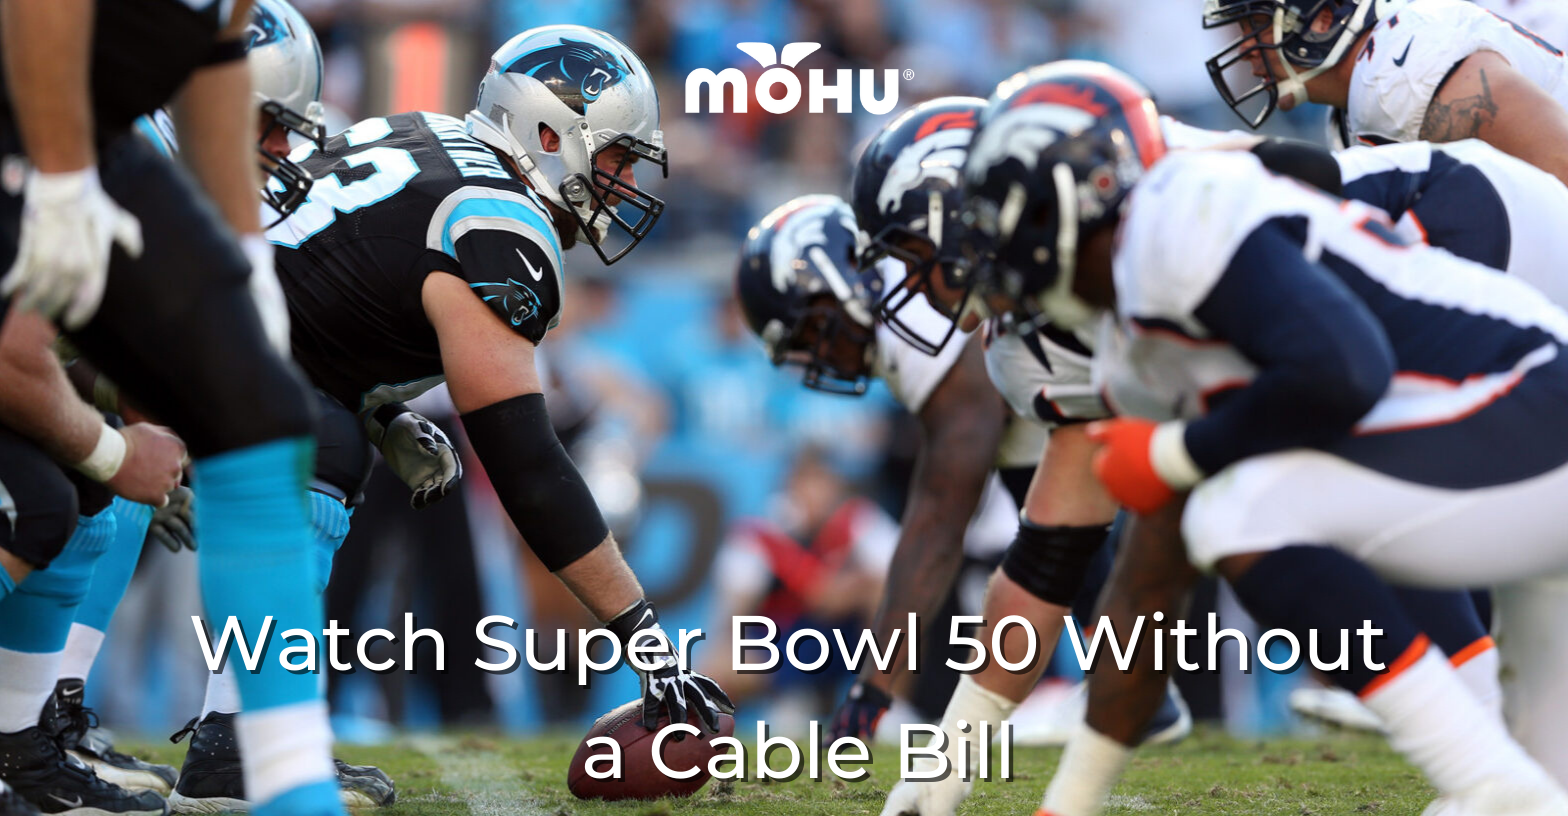 Broncos vs. Panthers photo of football players on field, Watch Super Bowl 50 Without a Cable Bill, Mohu logo